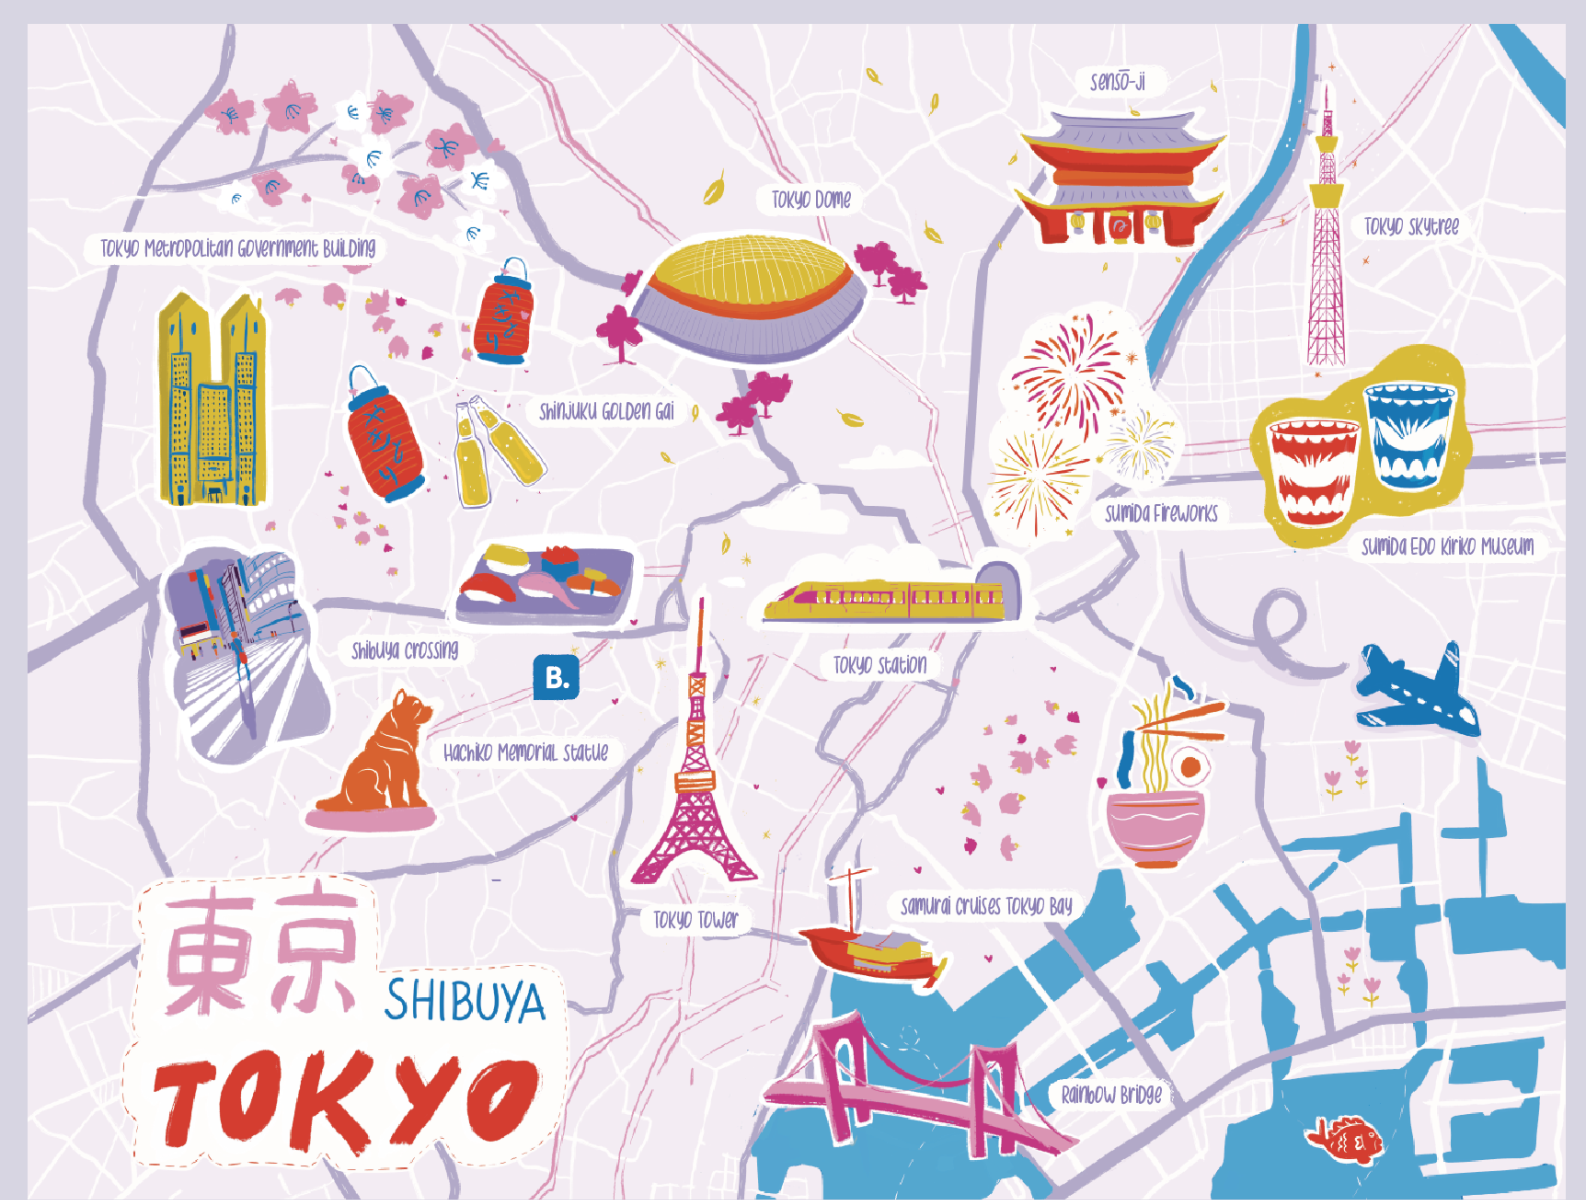 Tokyo map for Booking.com by Noemi De Feo on Dribbble